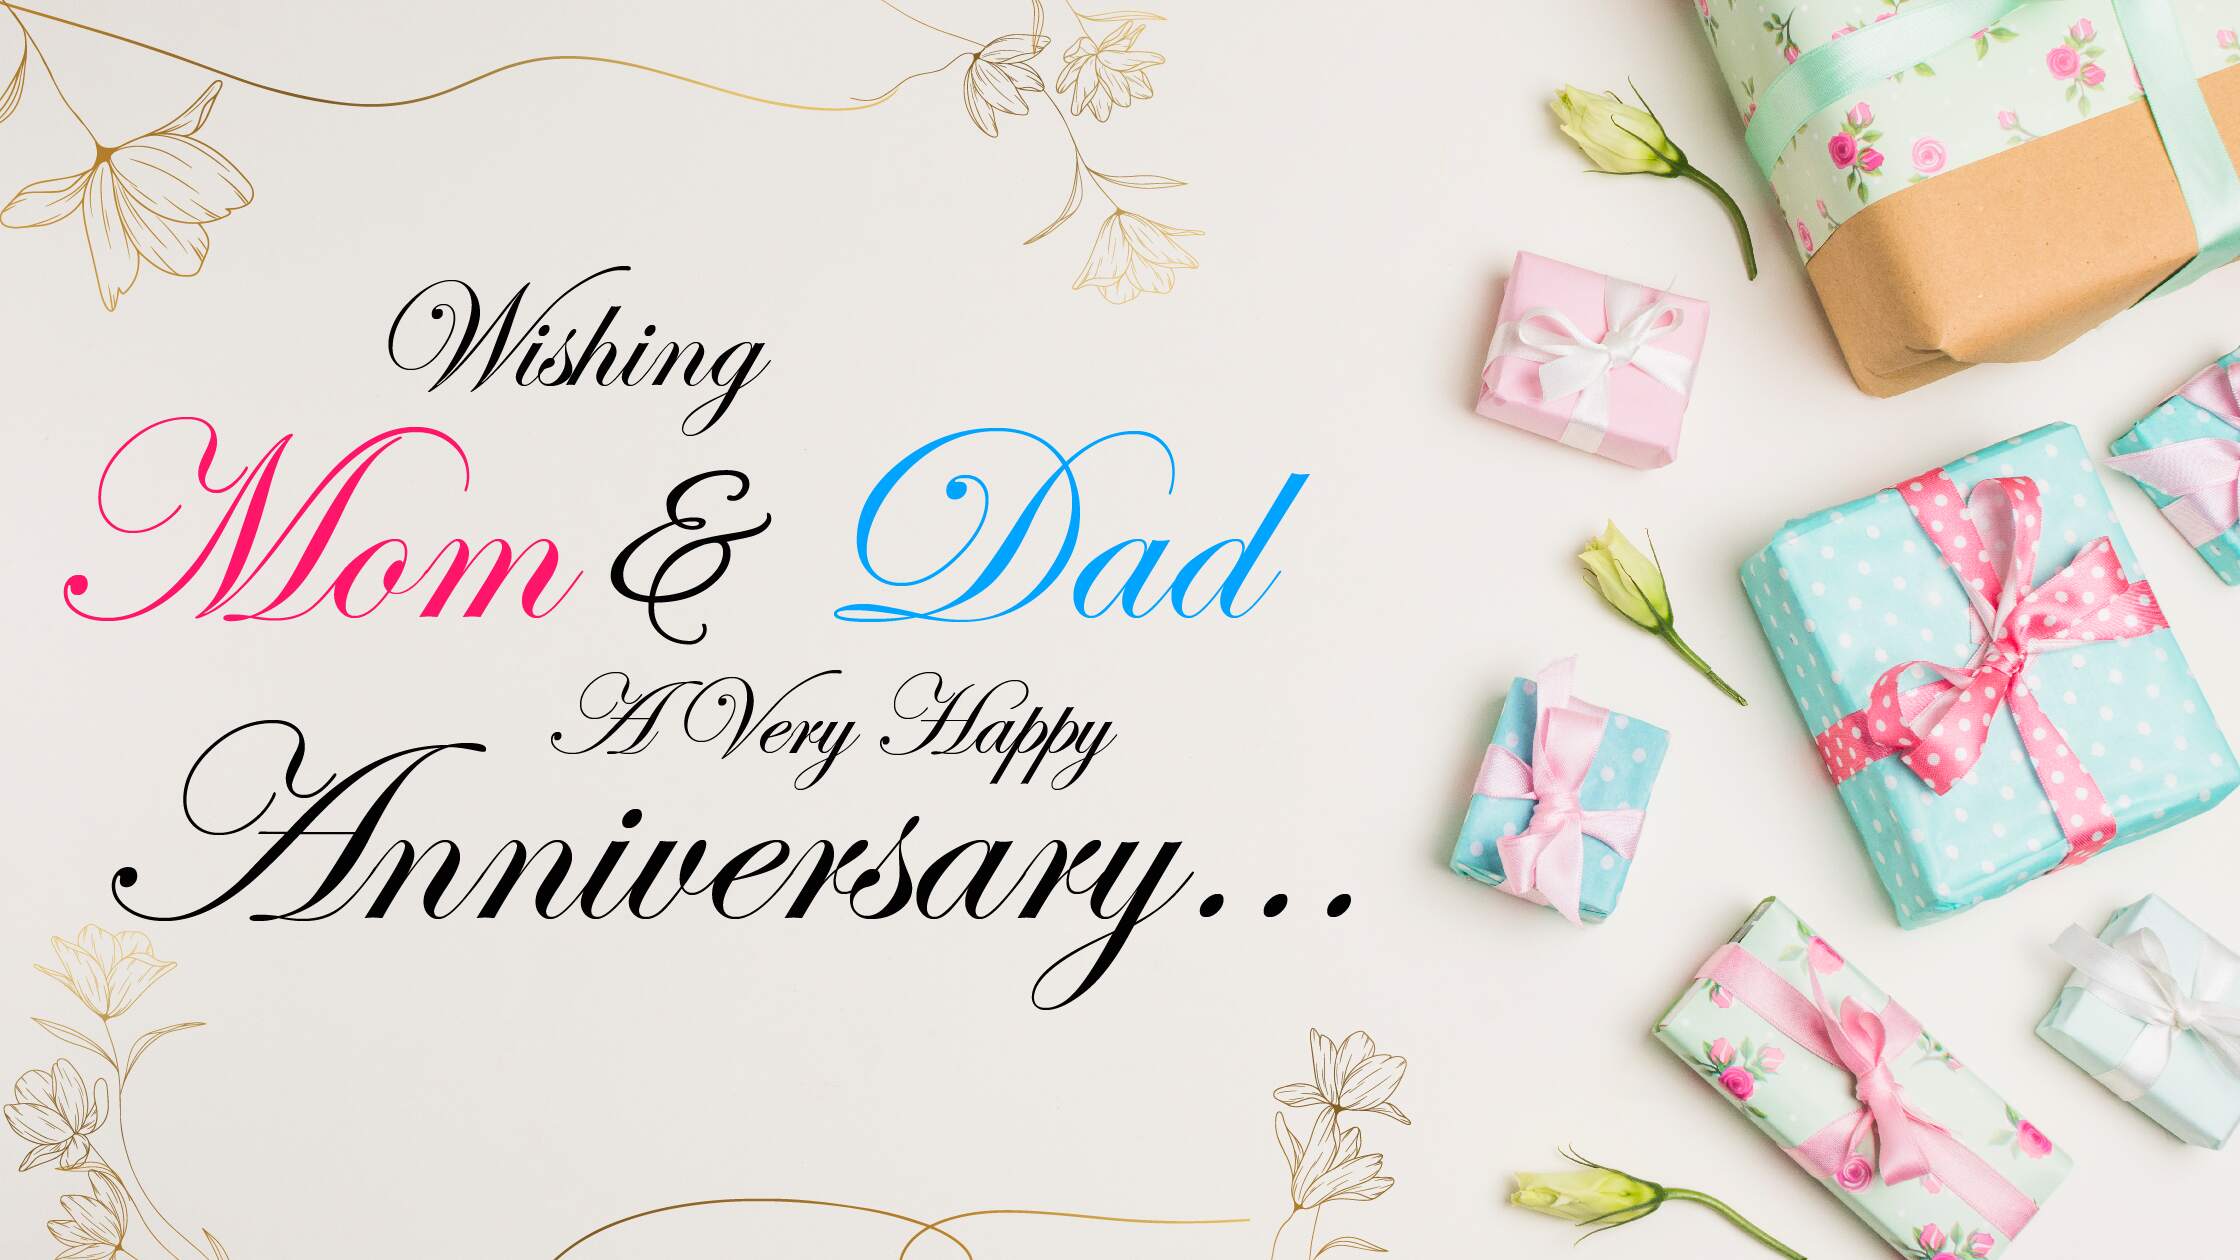 wishing-mom-and-dad-a-very-happy-anniversary